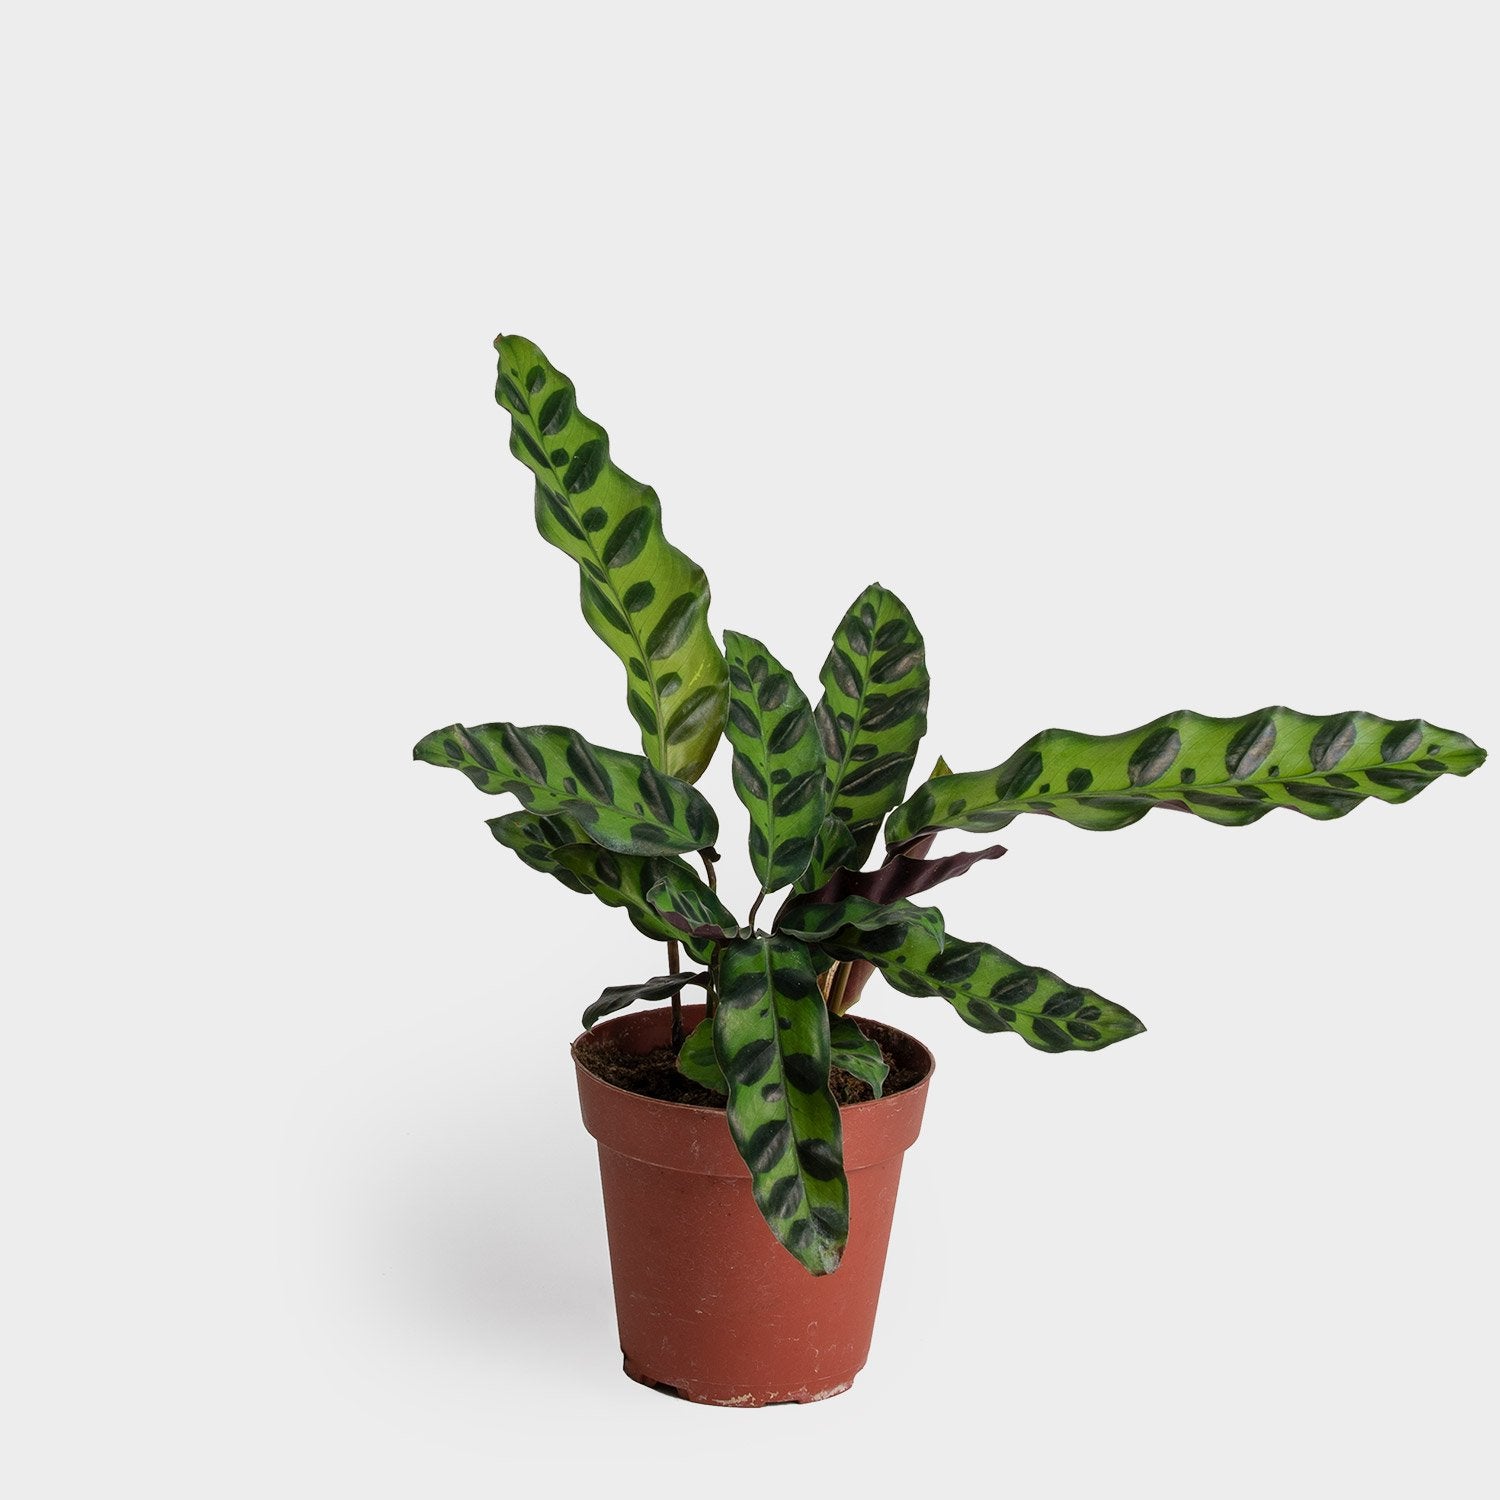 Potted plant with long slender leaves. The leaves have a wavy pattern along the edge and are bright green with dark green spots. 